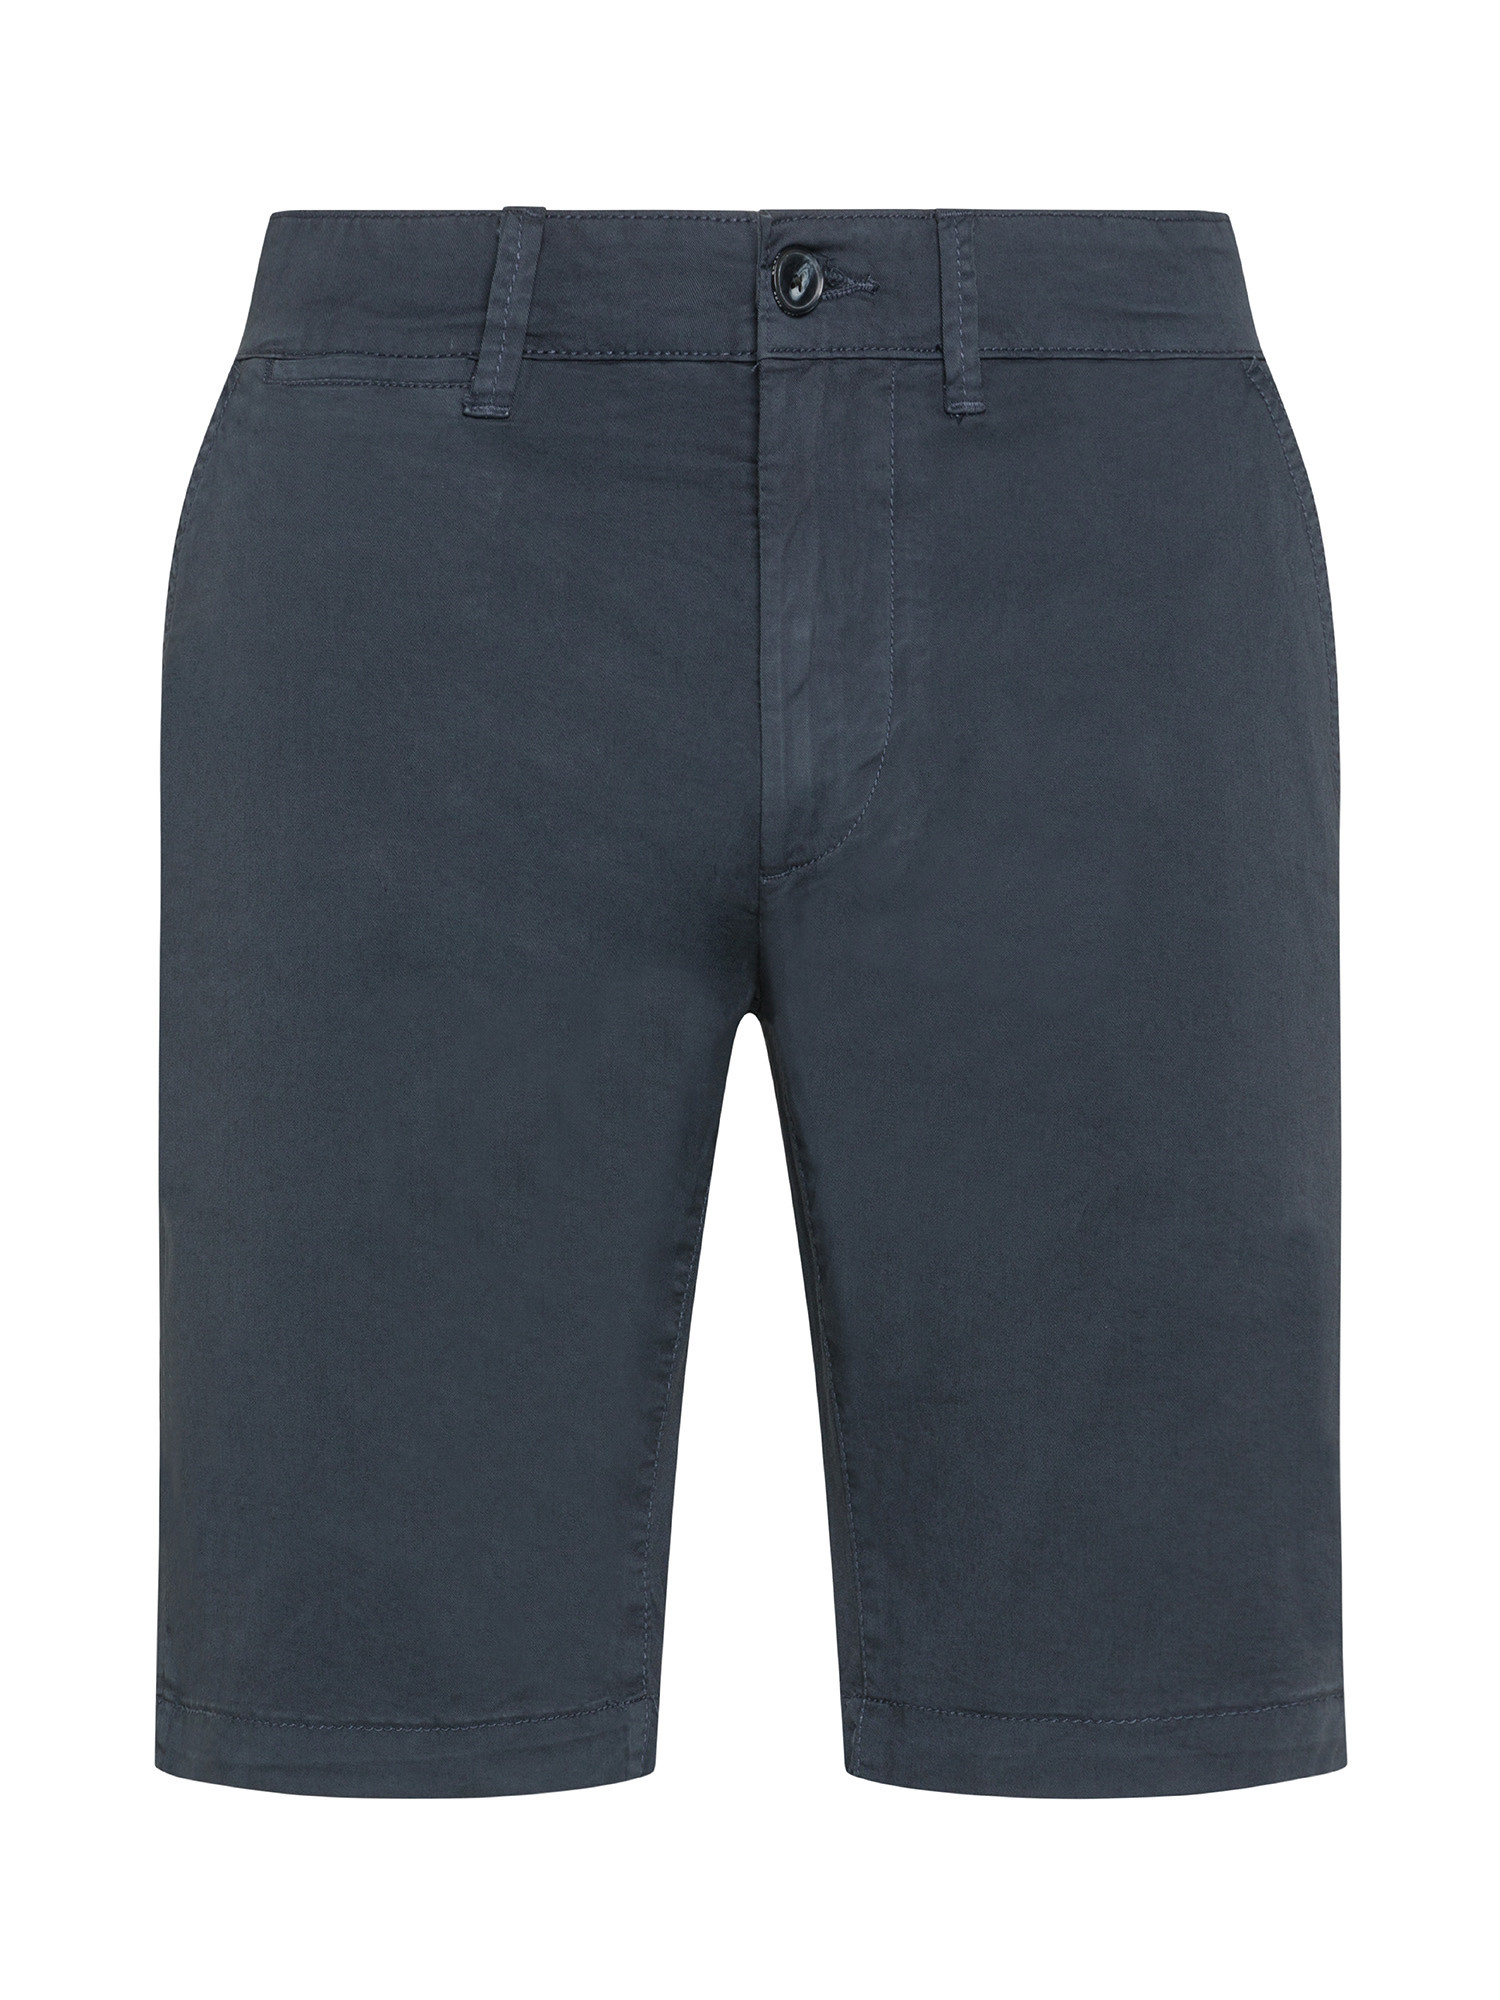 Pepe Jeans - Bermuda shorts in stretch cotton, Dark Blue, large image number 0